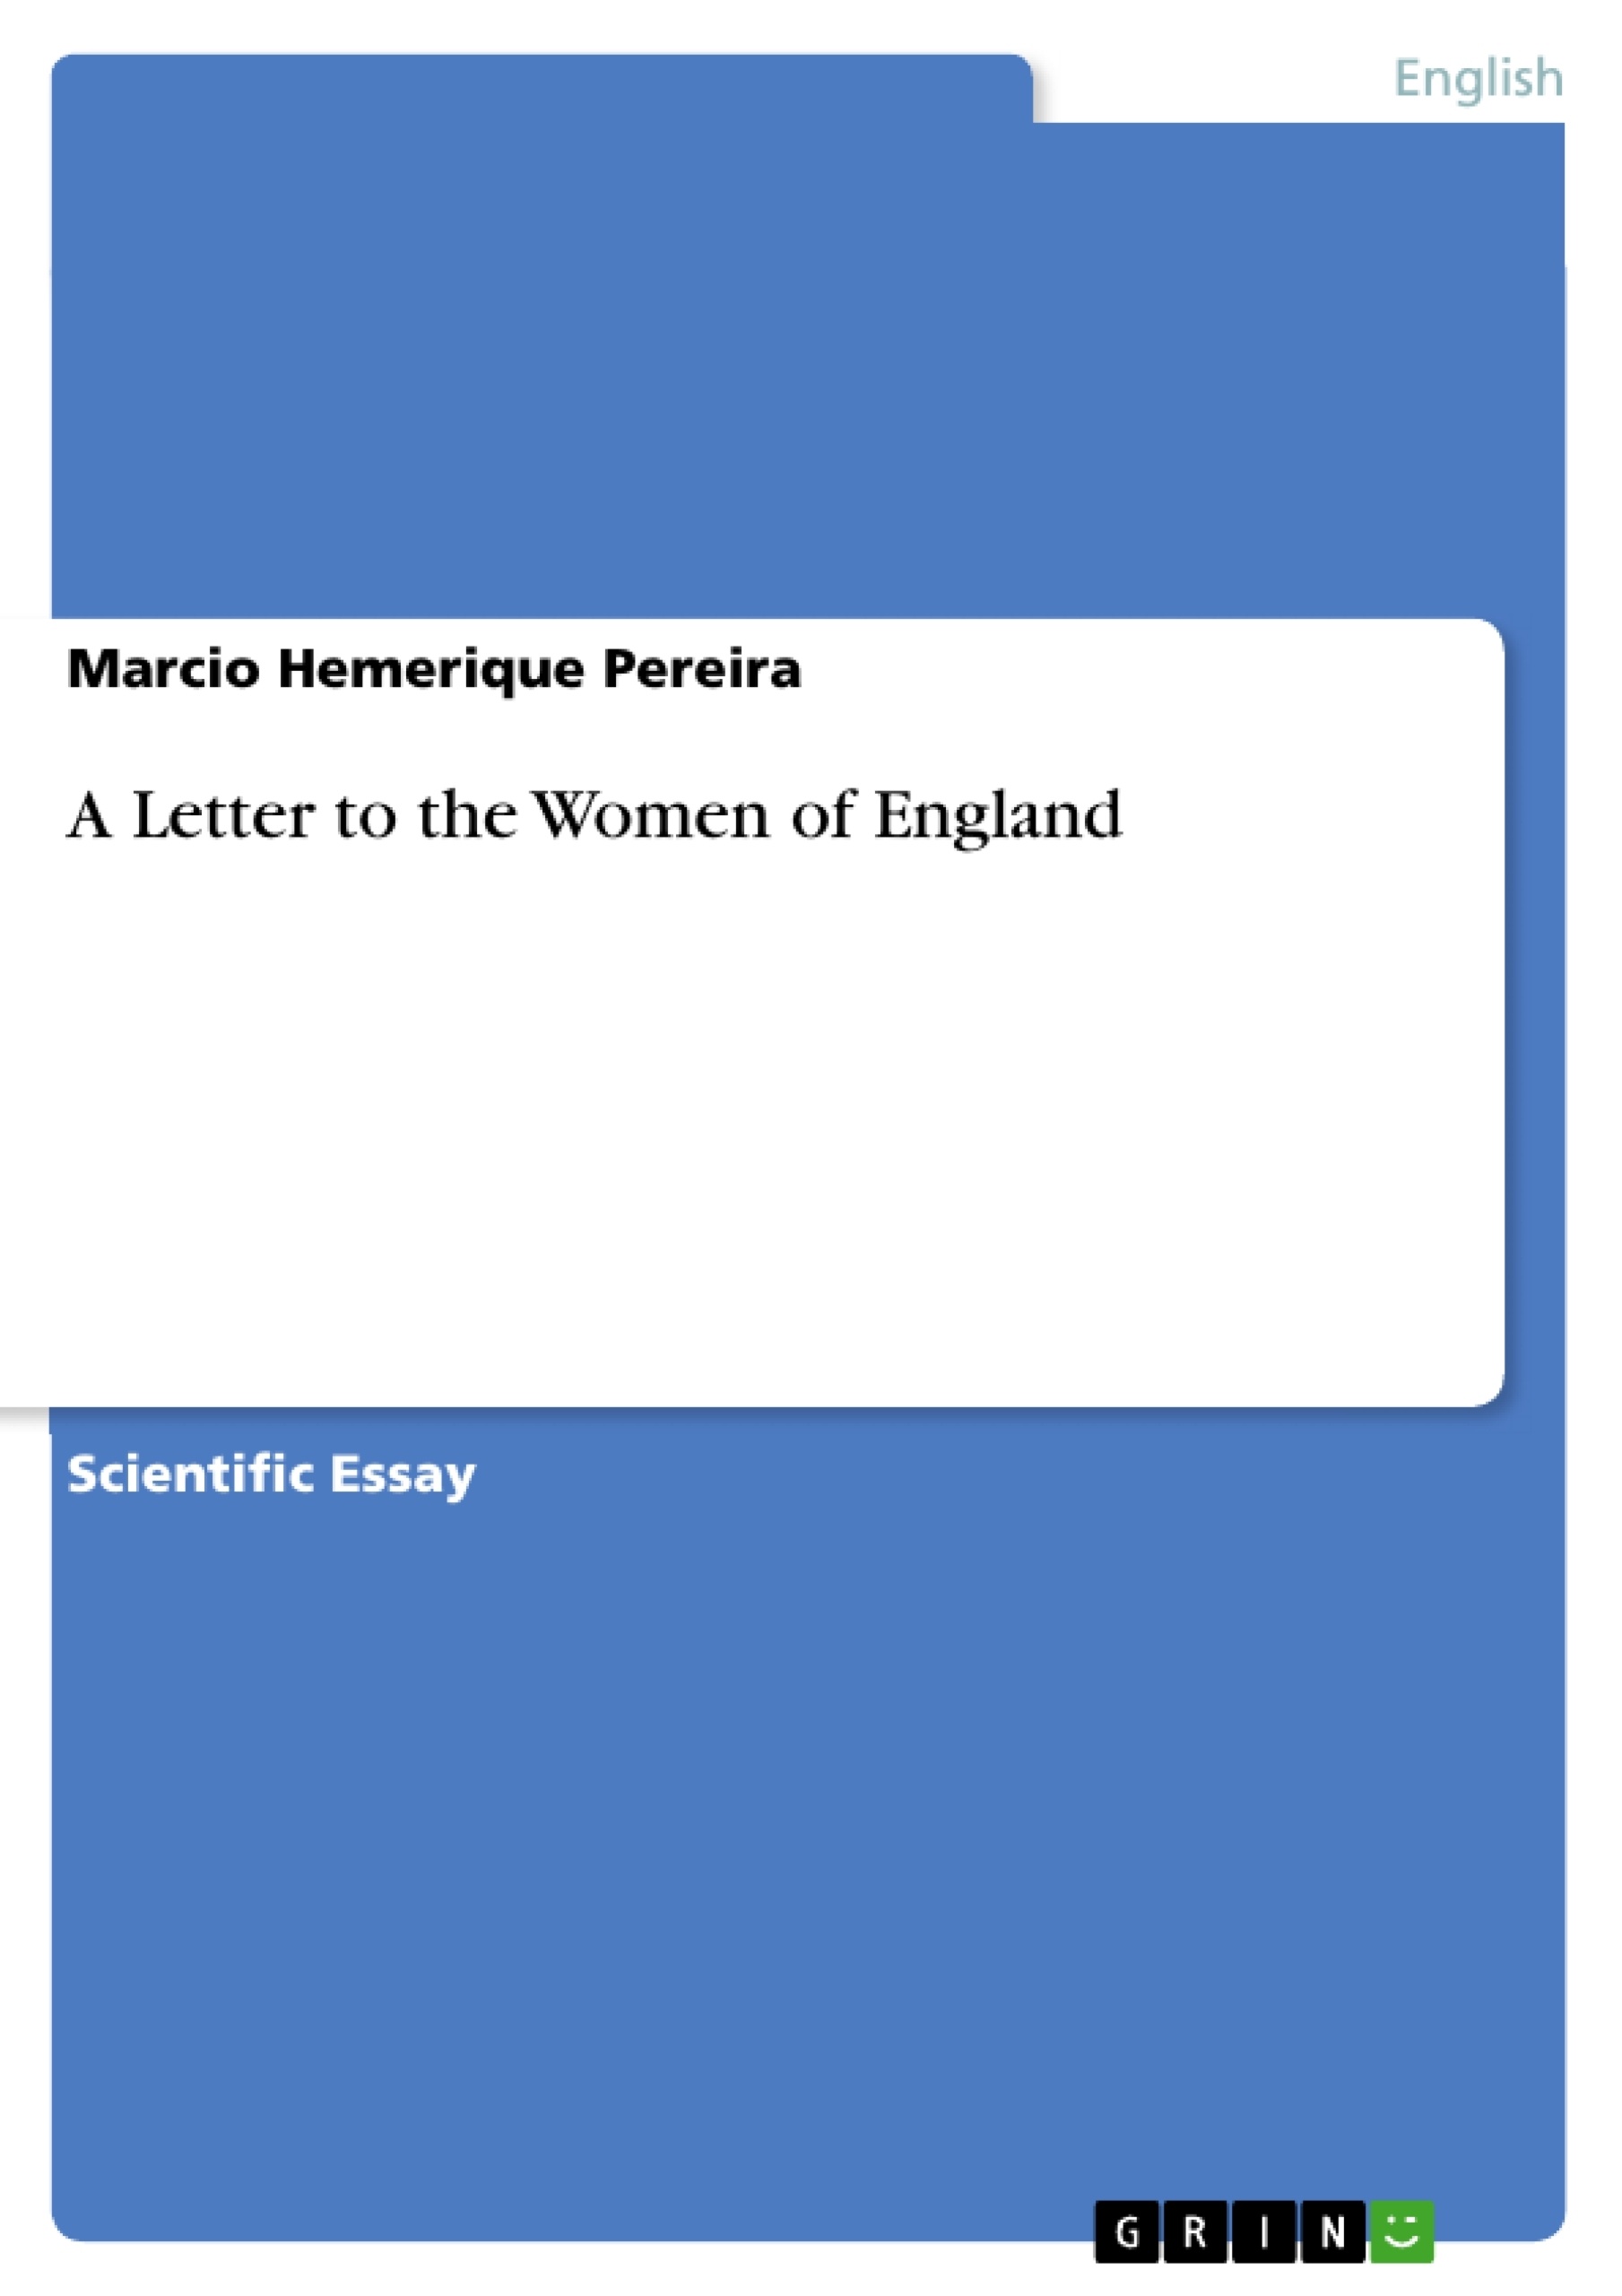 Título: A Letter to the Women of England